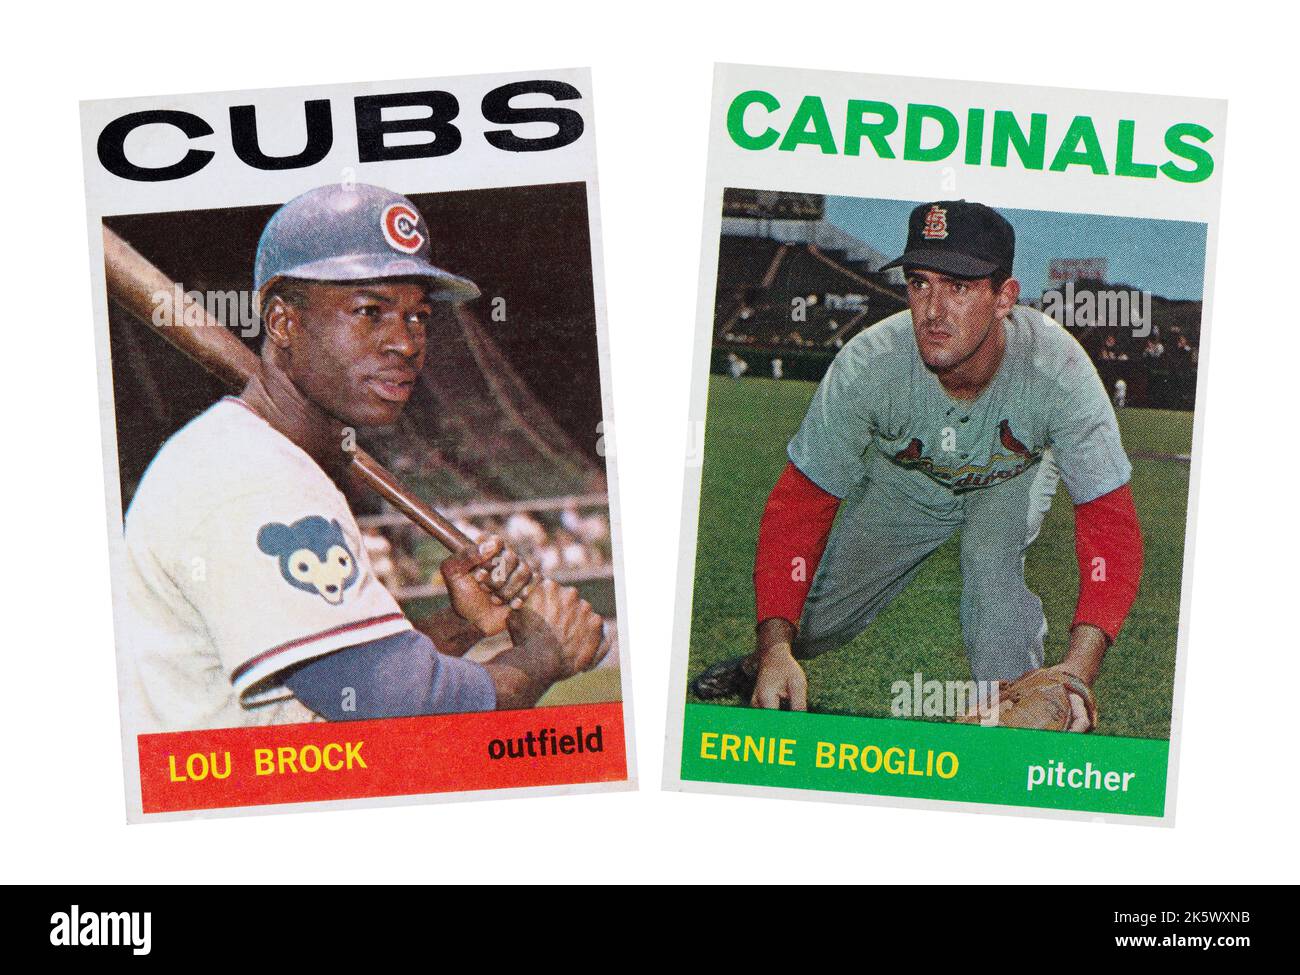 1964 baseball cards of Chicago Cubs Lou Brock and St. Louis Cardinals Ernie Broglio.  Lou Brock and Ernie Broglio were traded during the 1964 season. Stock Photo